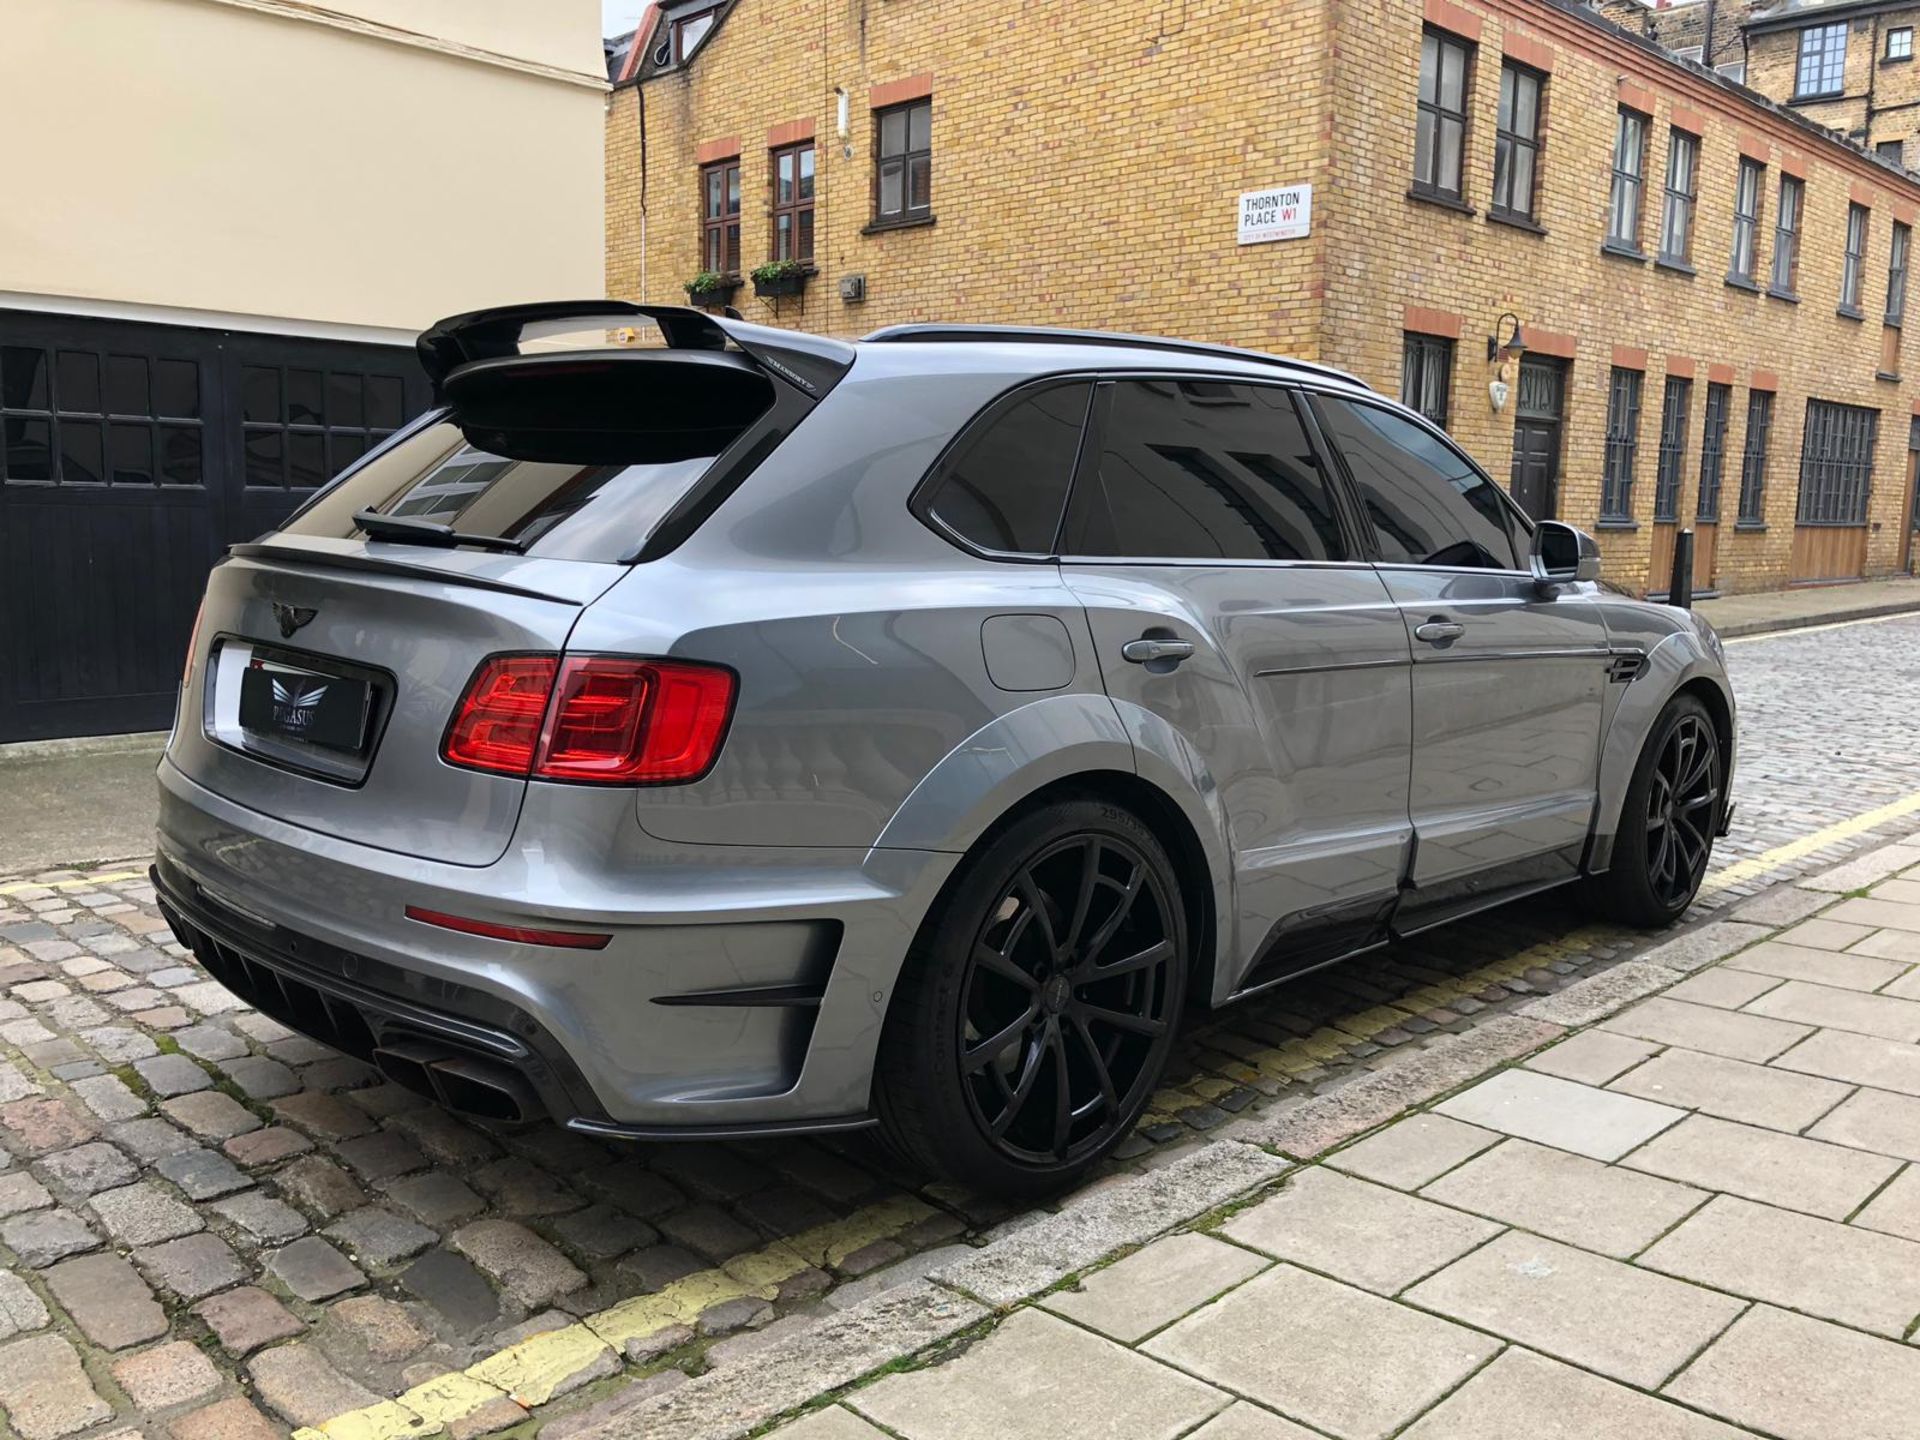 5% BP! BENTLEY BENTAYGA MANSORY EDITION 2017 LEFT HAND DRIVE LHD *NO VAT* £400k new!! ONE OF ONE! - Image 4 of 13